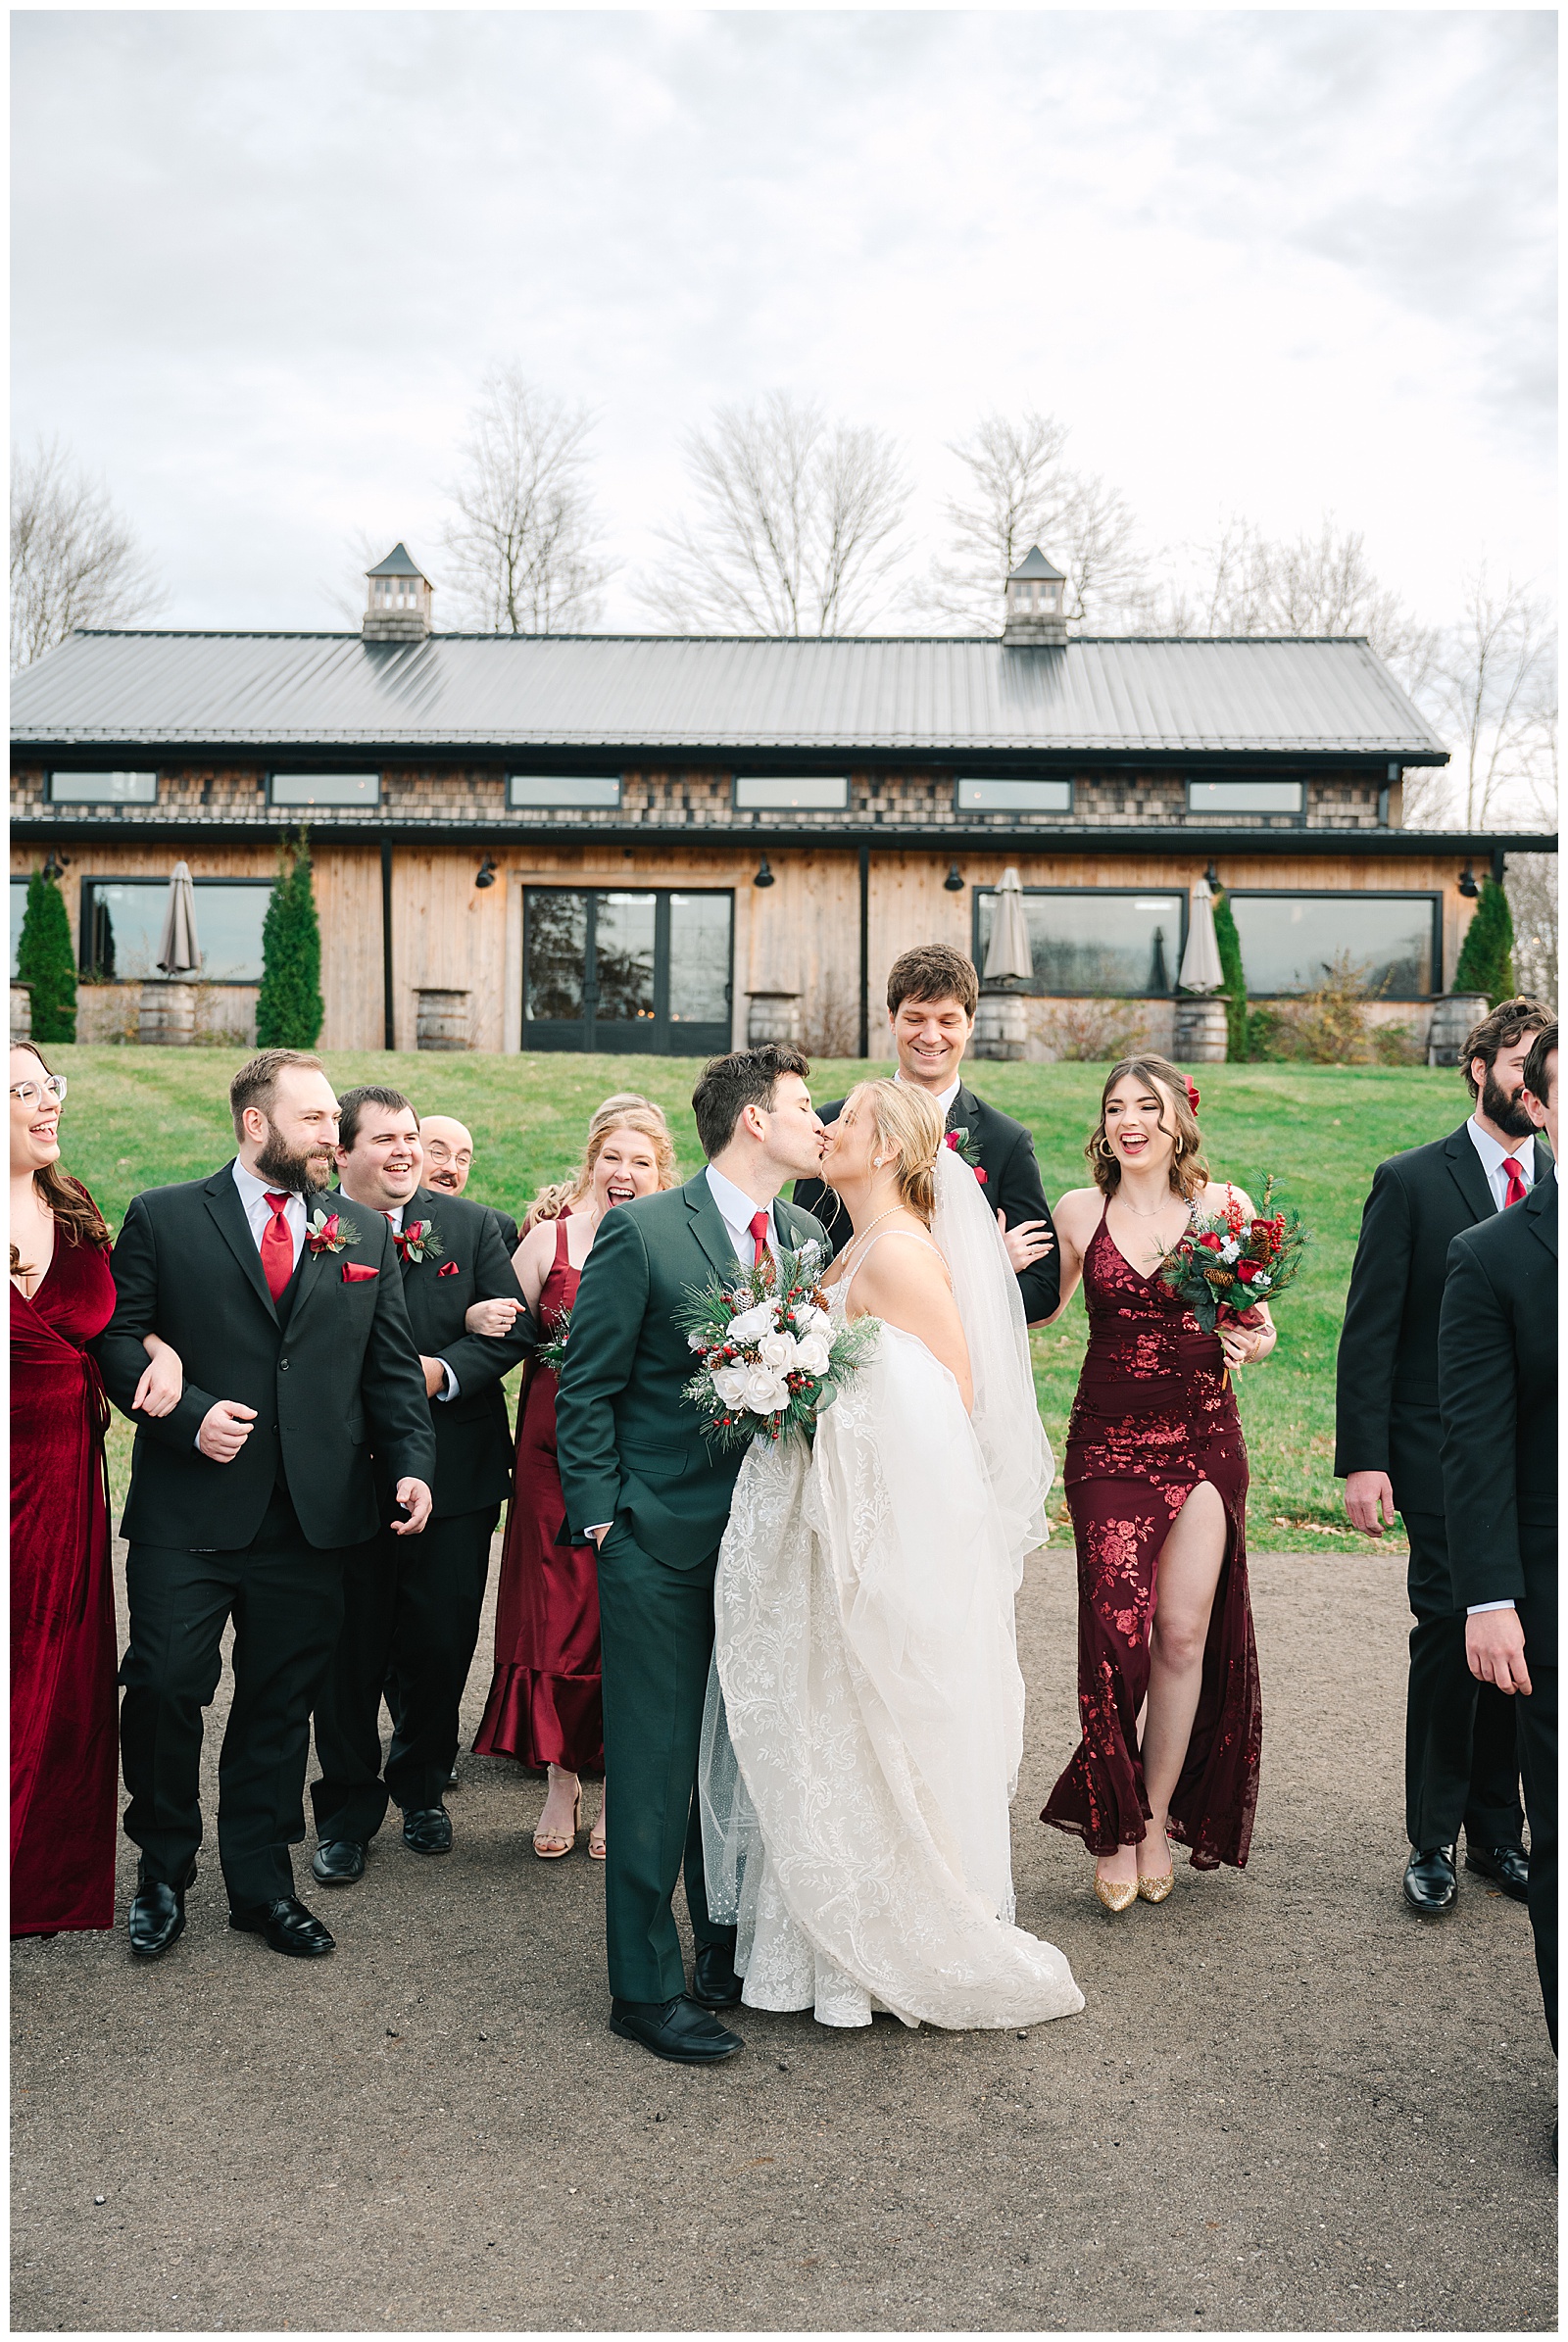 Christmas Cozy Cabin Feel Wedding at The Ponds Venue in Beach City Ohio